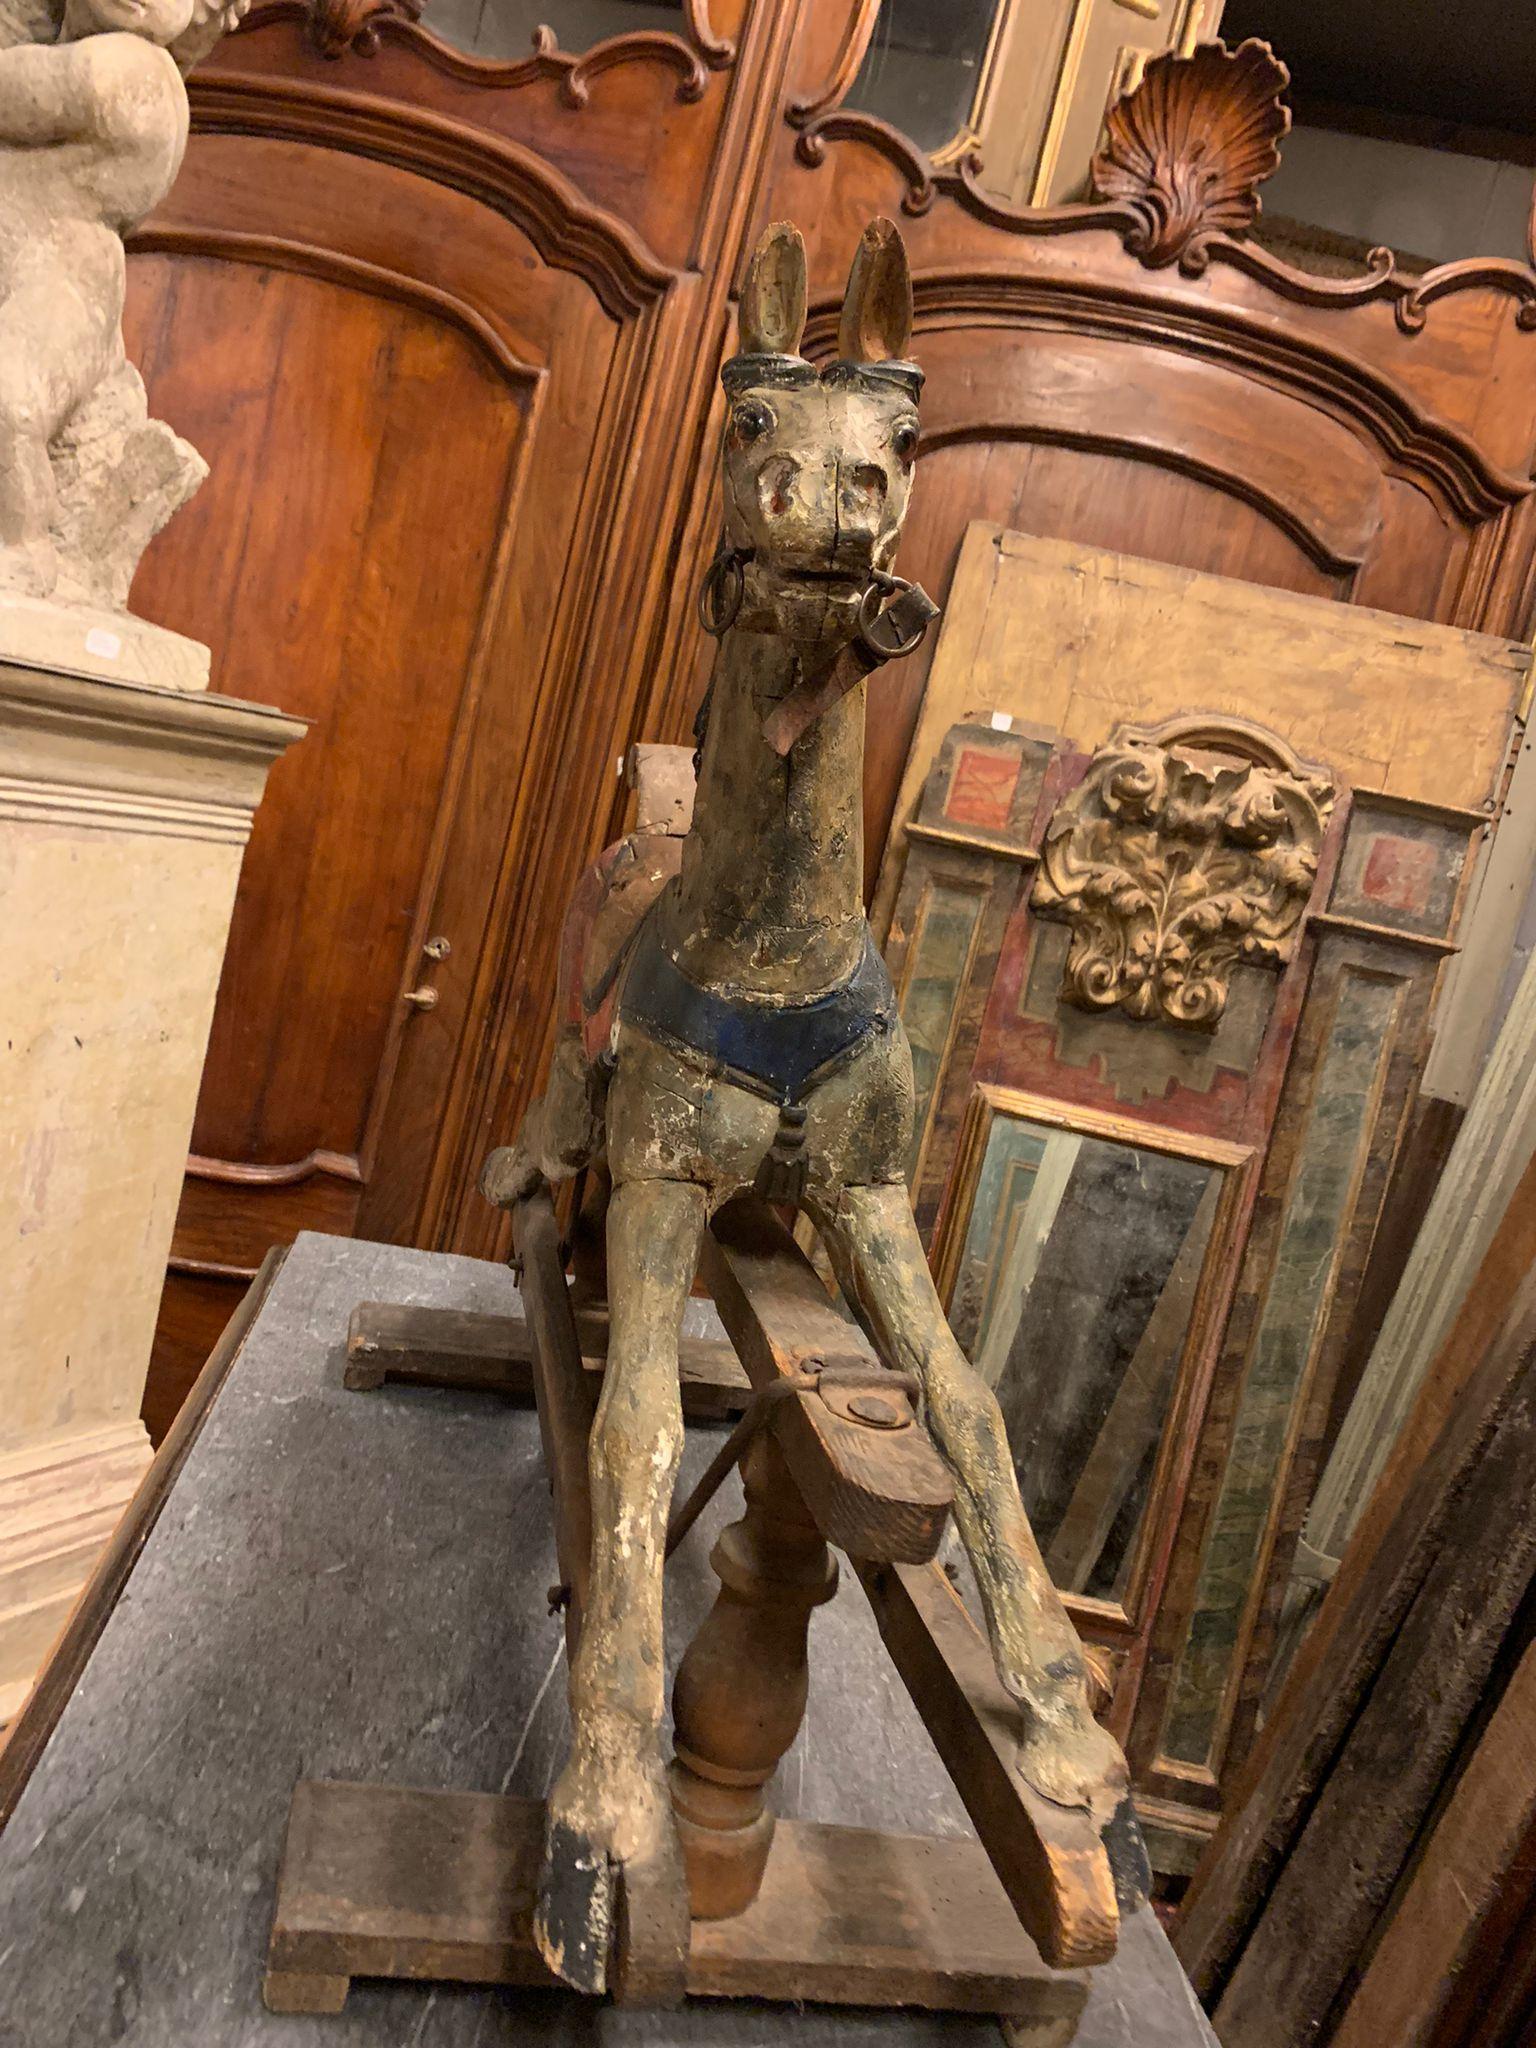 Antique toy horse, hand-carved with underlying bars and rocking movement, hand-built in solid and polychrome wood, provenance from Piedmont (Italy), 18th century, dimensions W 87 x H 74 x D 62 cm